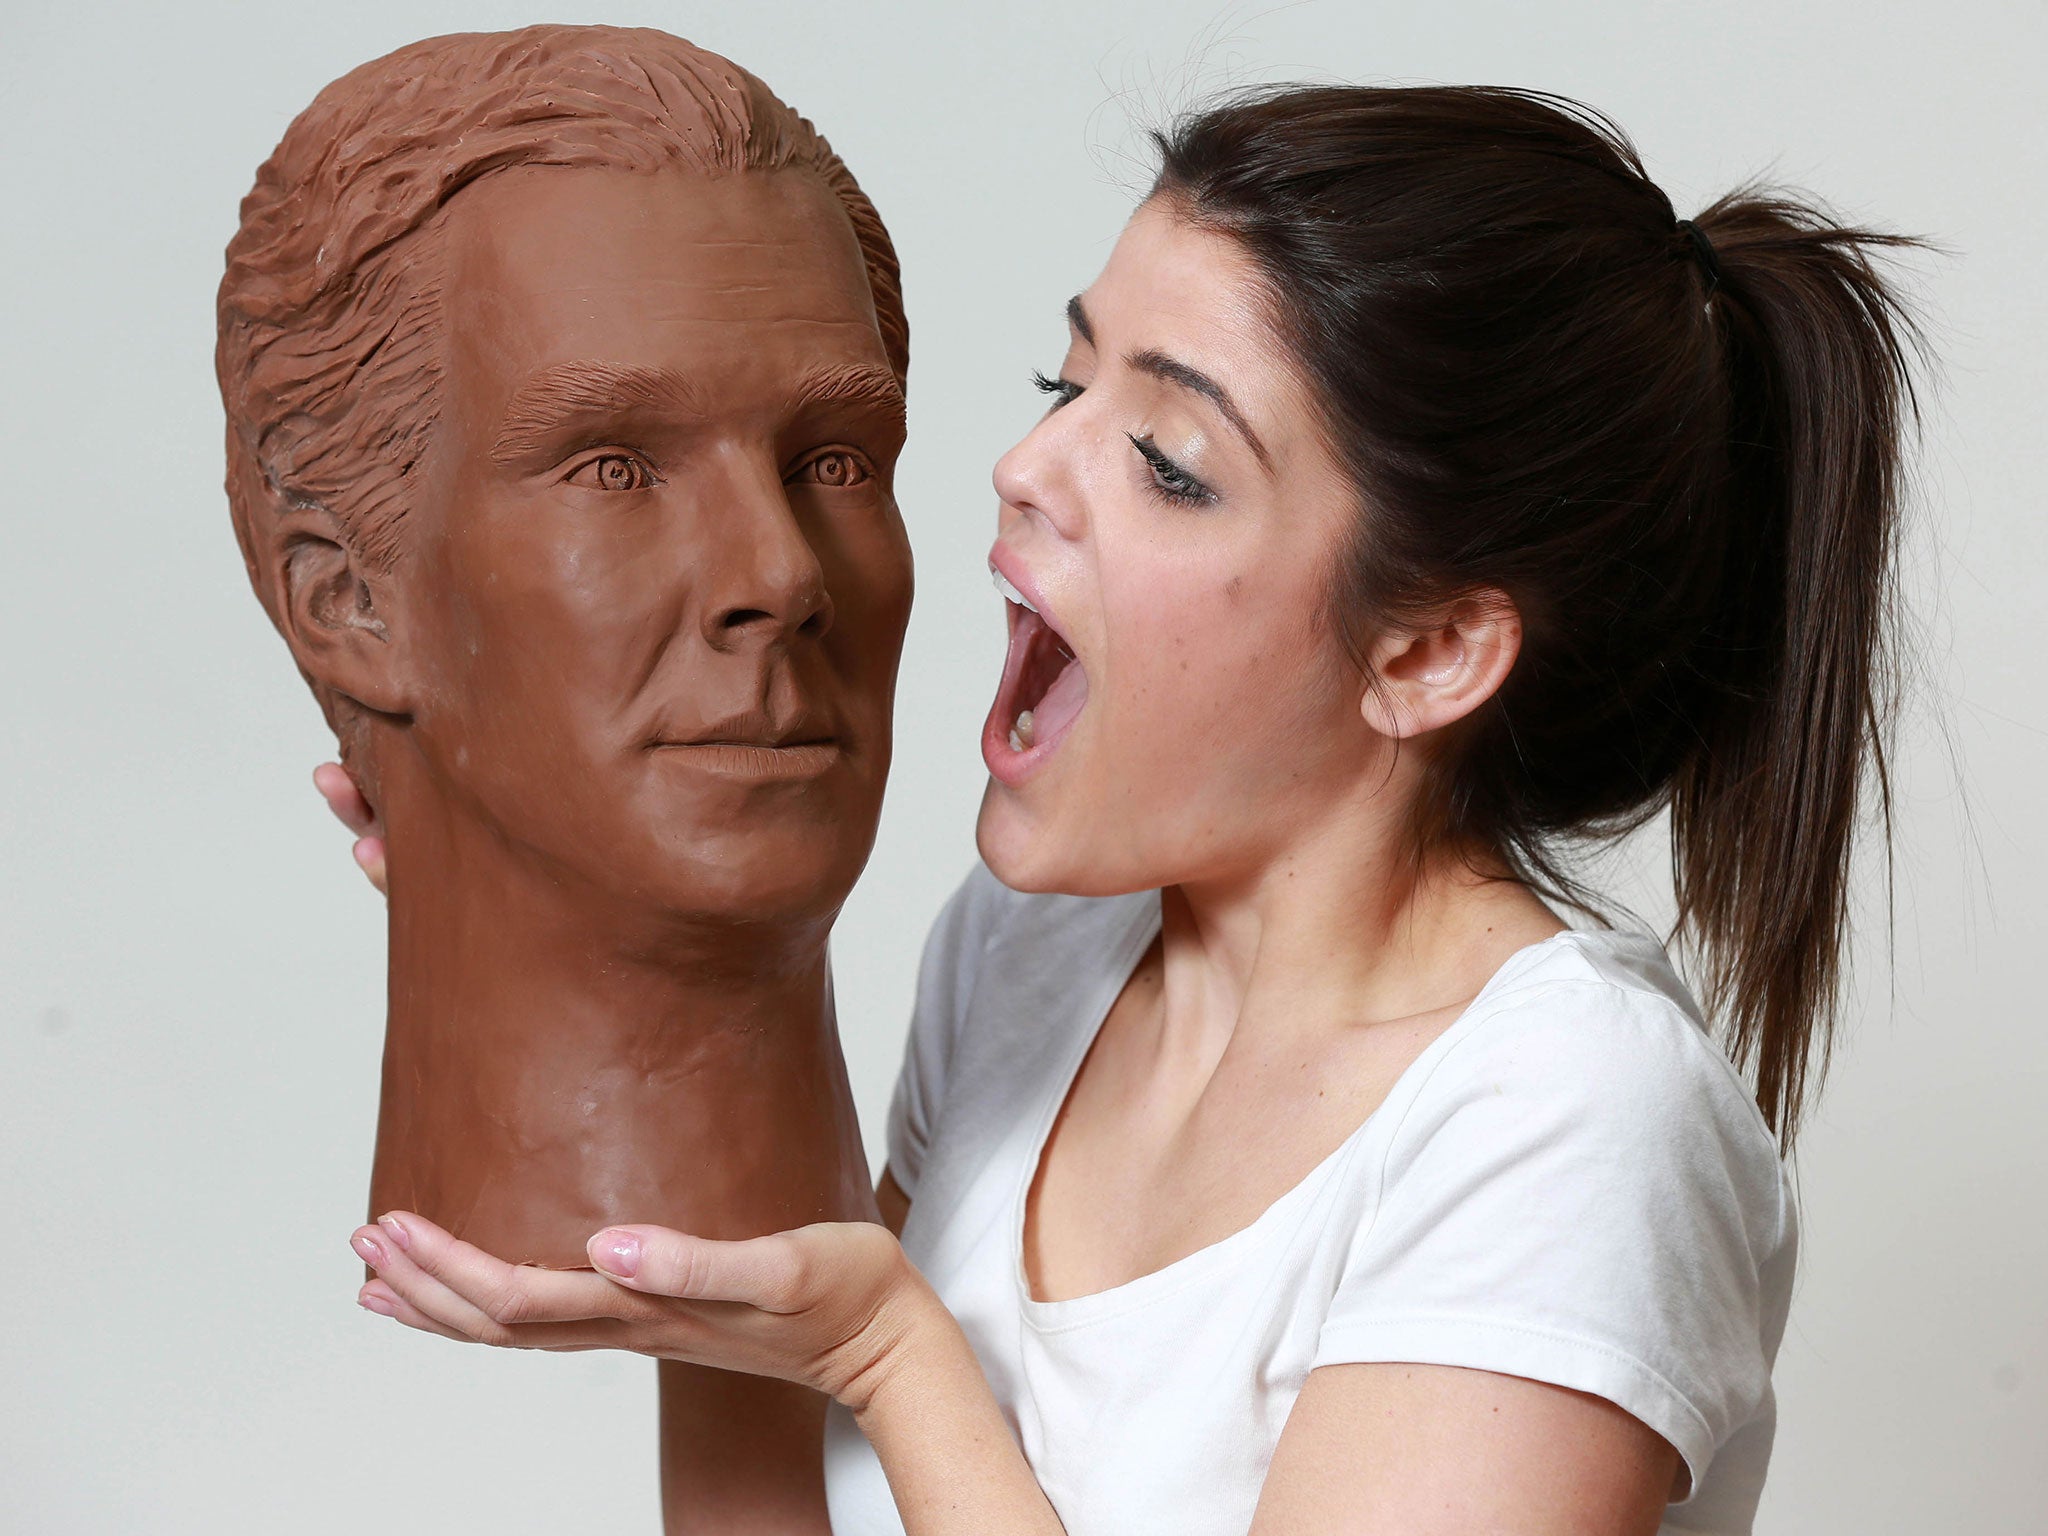 The life-size Benedict Cumberbatch chocolate sculpture is really quite something